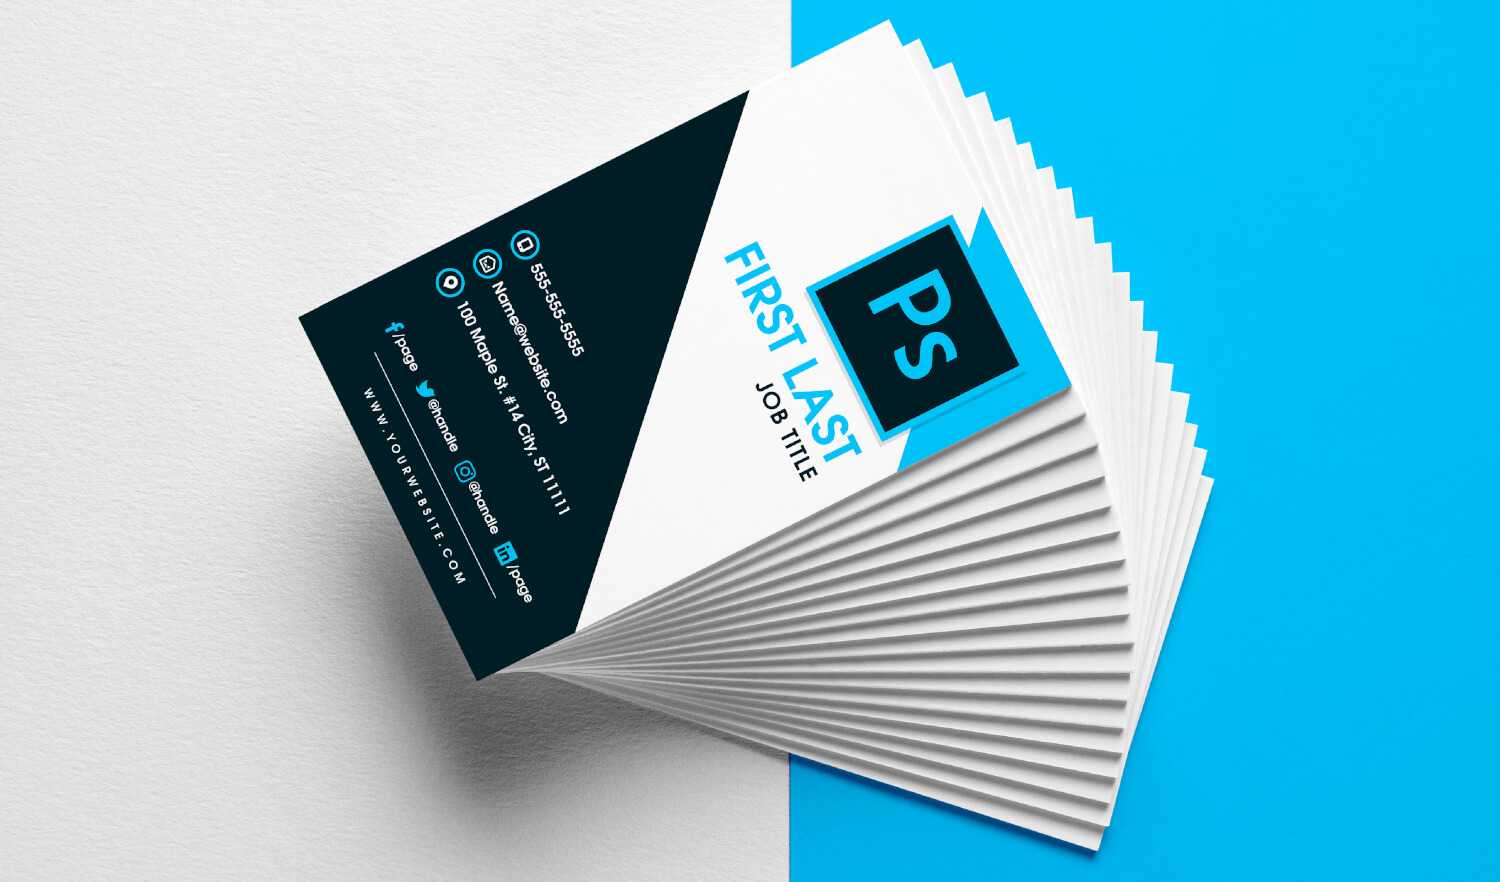 Free Vertical Business Card Template In Psd Format With Free Business Card Templates In Psd Format